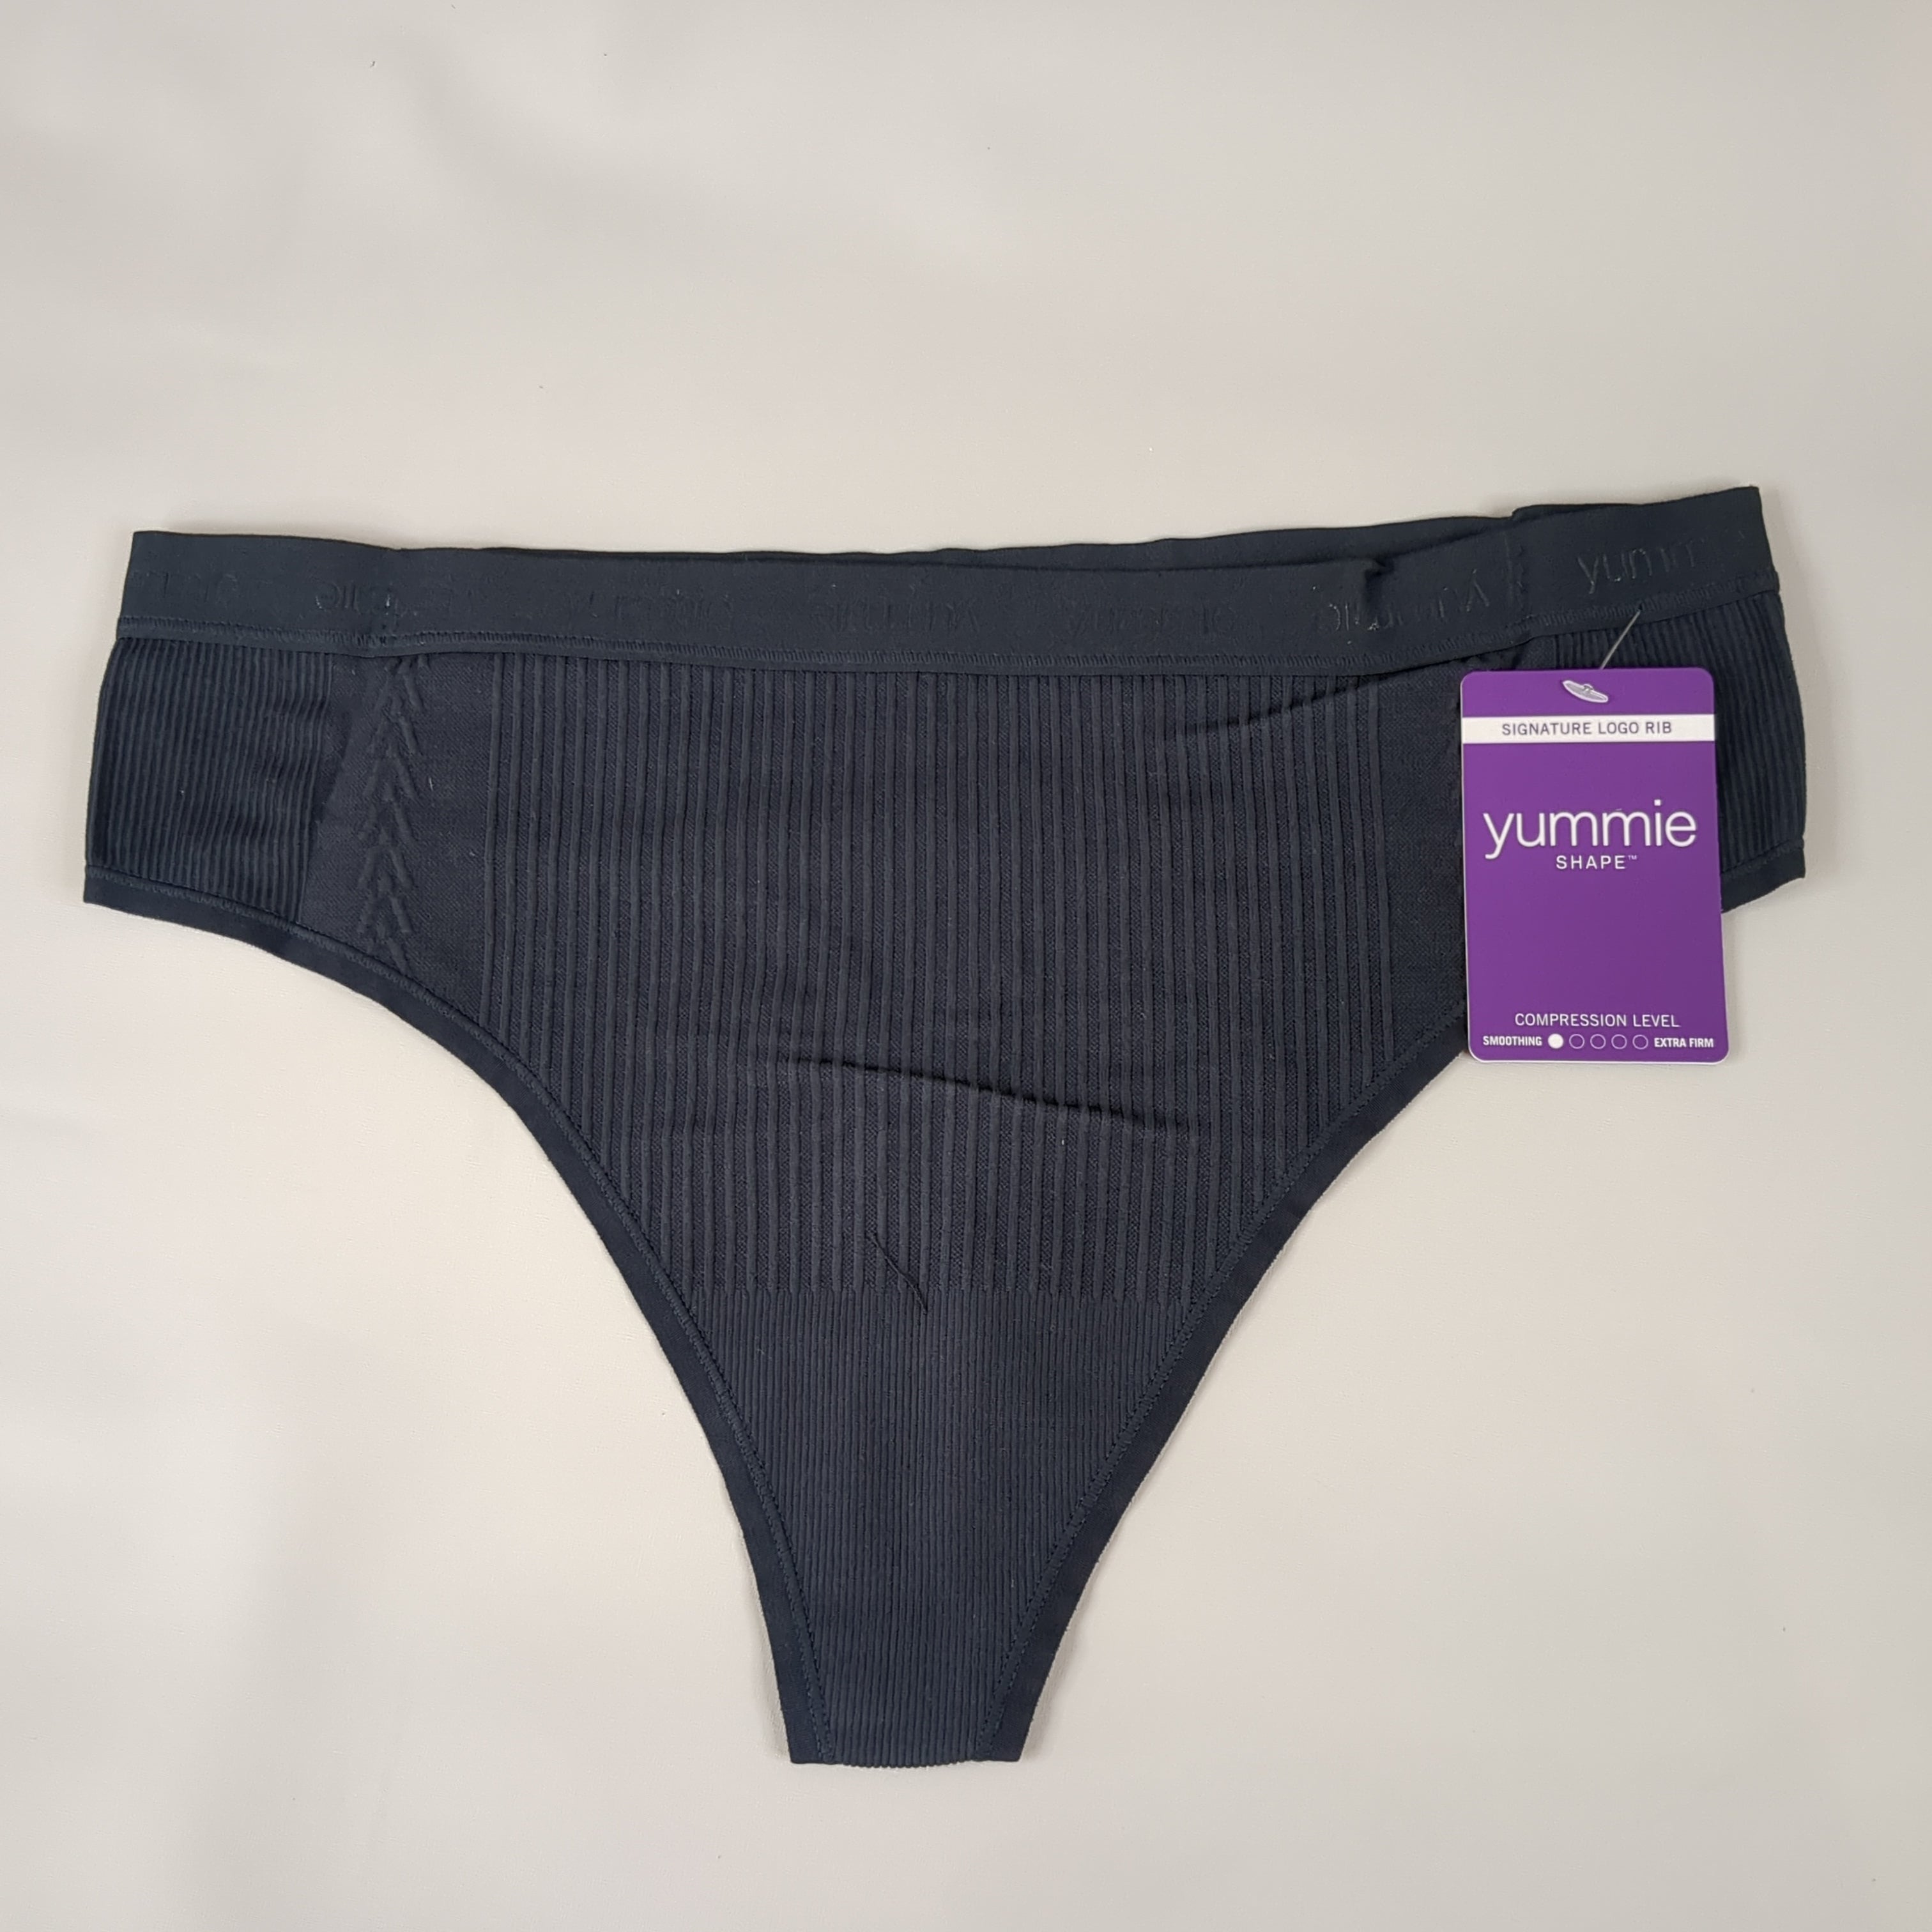 Clothing & Shoes - Socks & Underwear - Panties - Yummie® Eden Ribbed Thong  with Logo - Online Shopping for Canadians